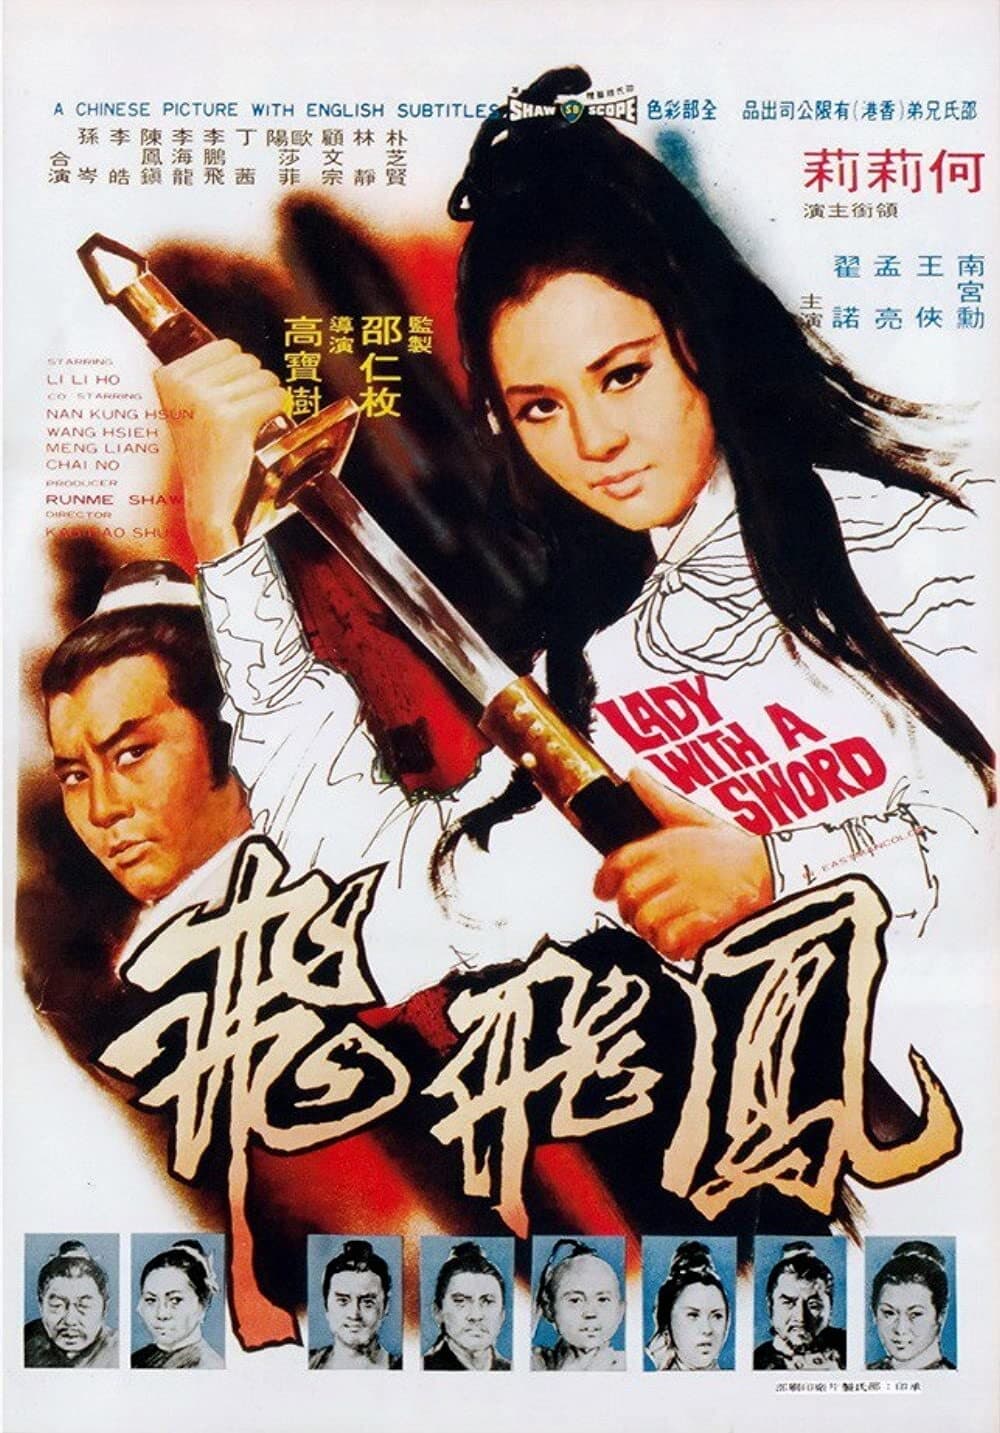 Lady with a Sword (1971)